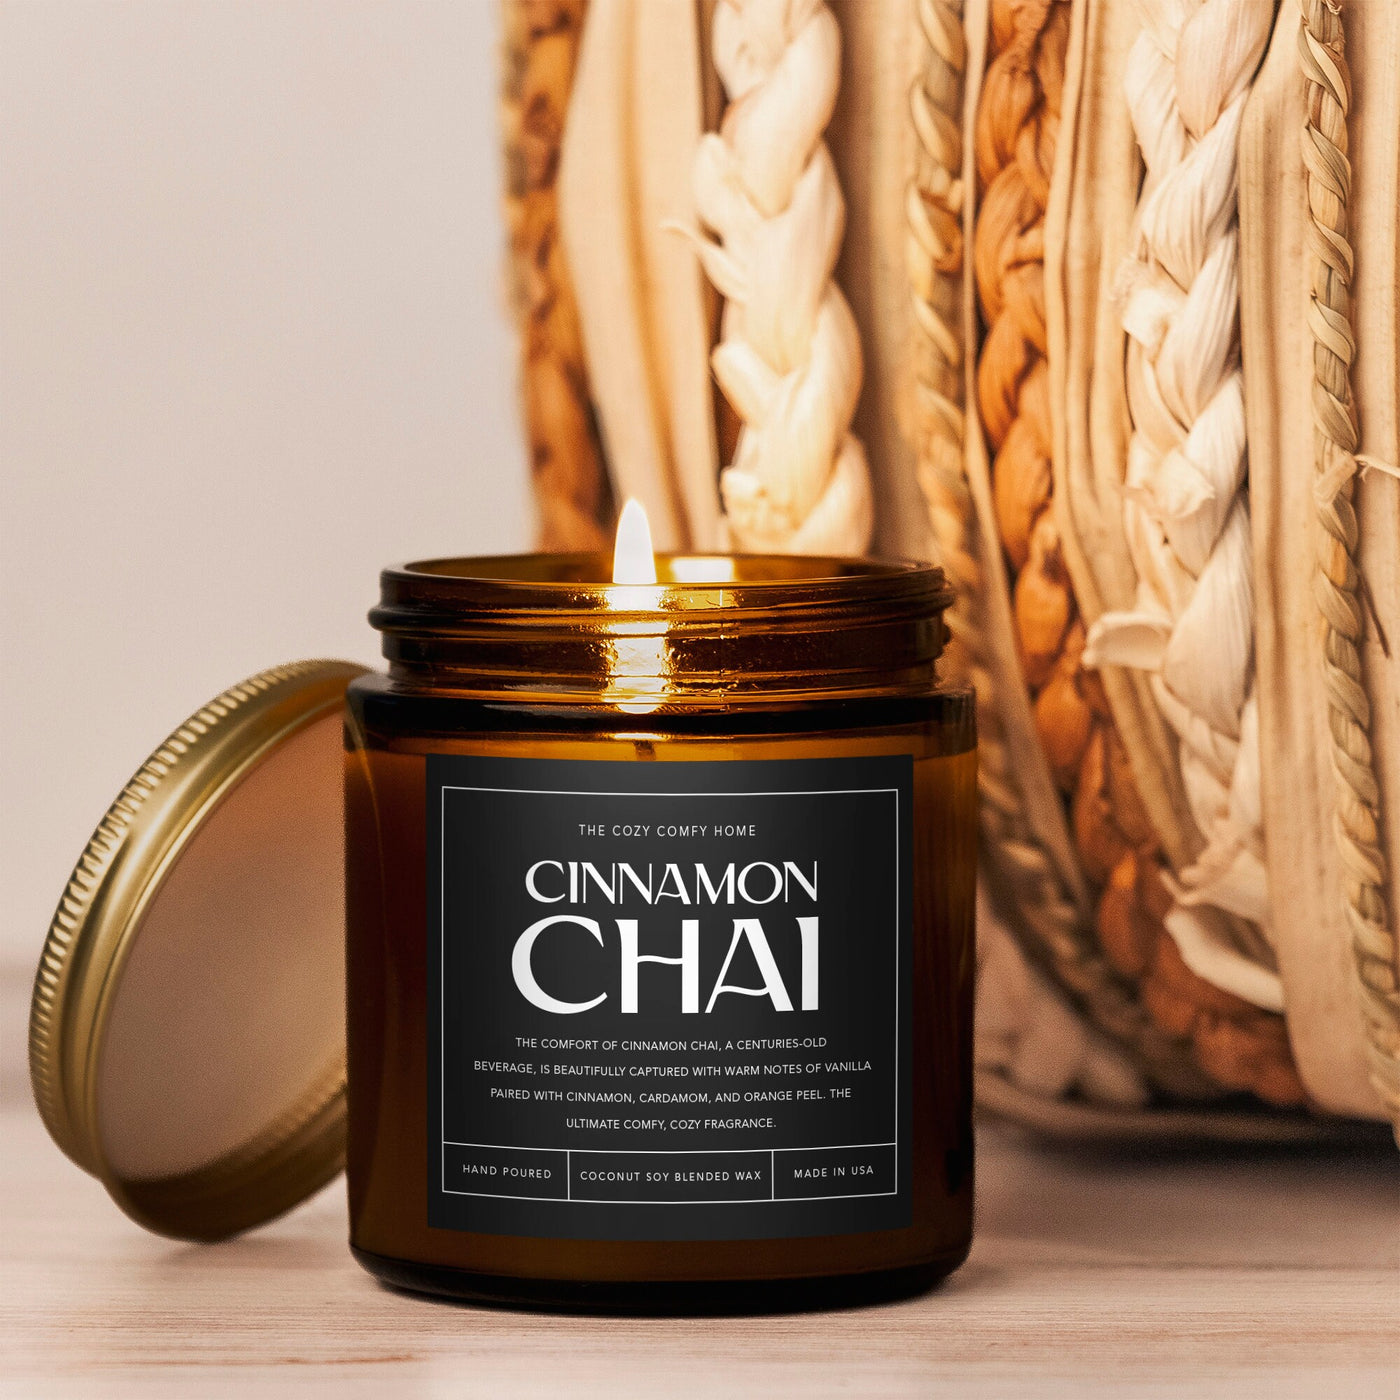 Cinnamon chai hand poured candle, Scented Candle, Coconut soy wax candle, Vegan candle, Gift for her, Gift For mom, Gift for Sister